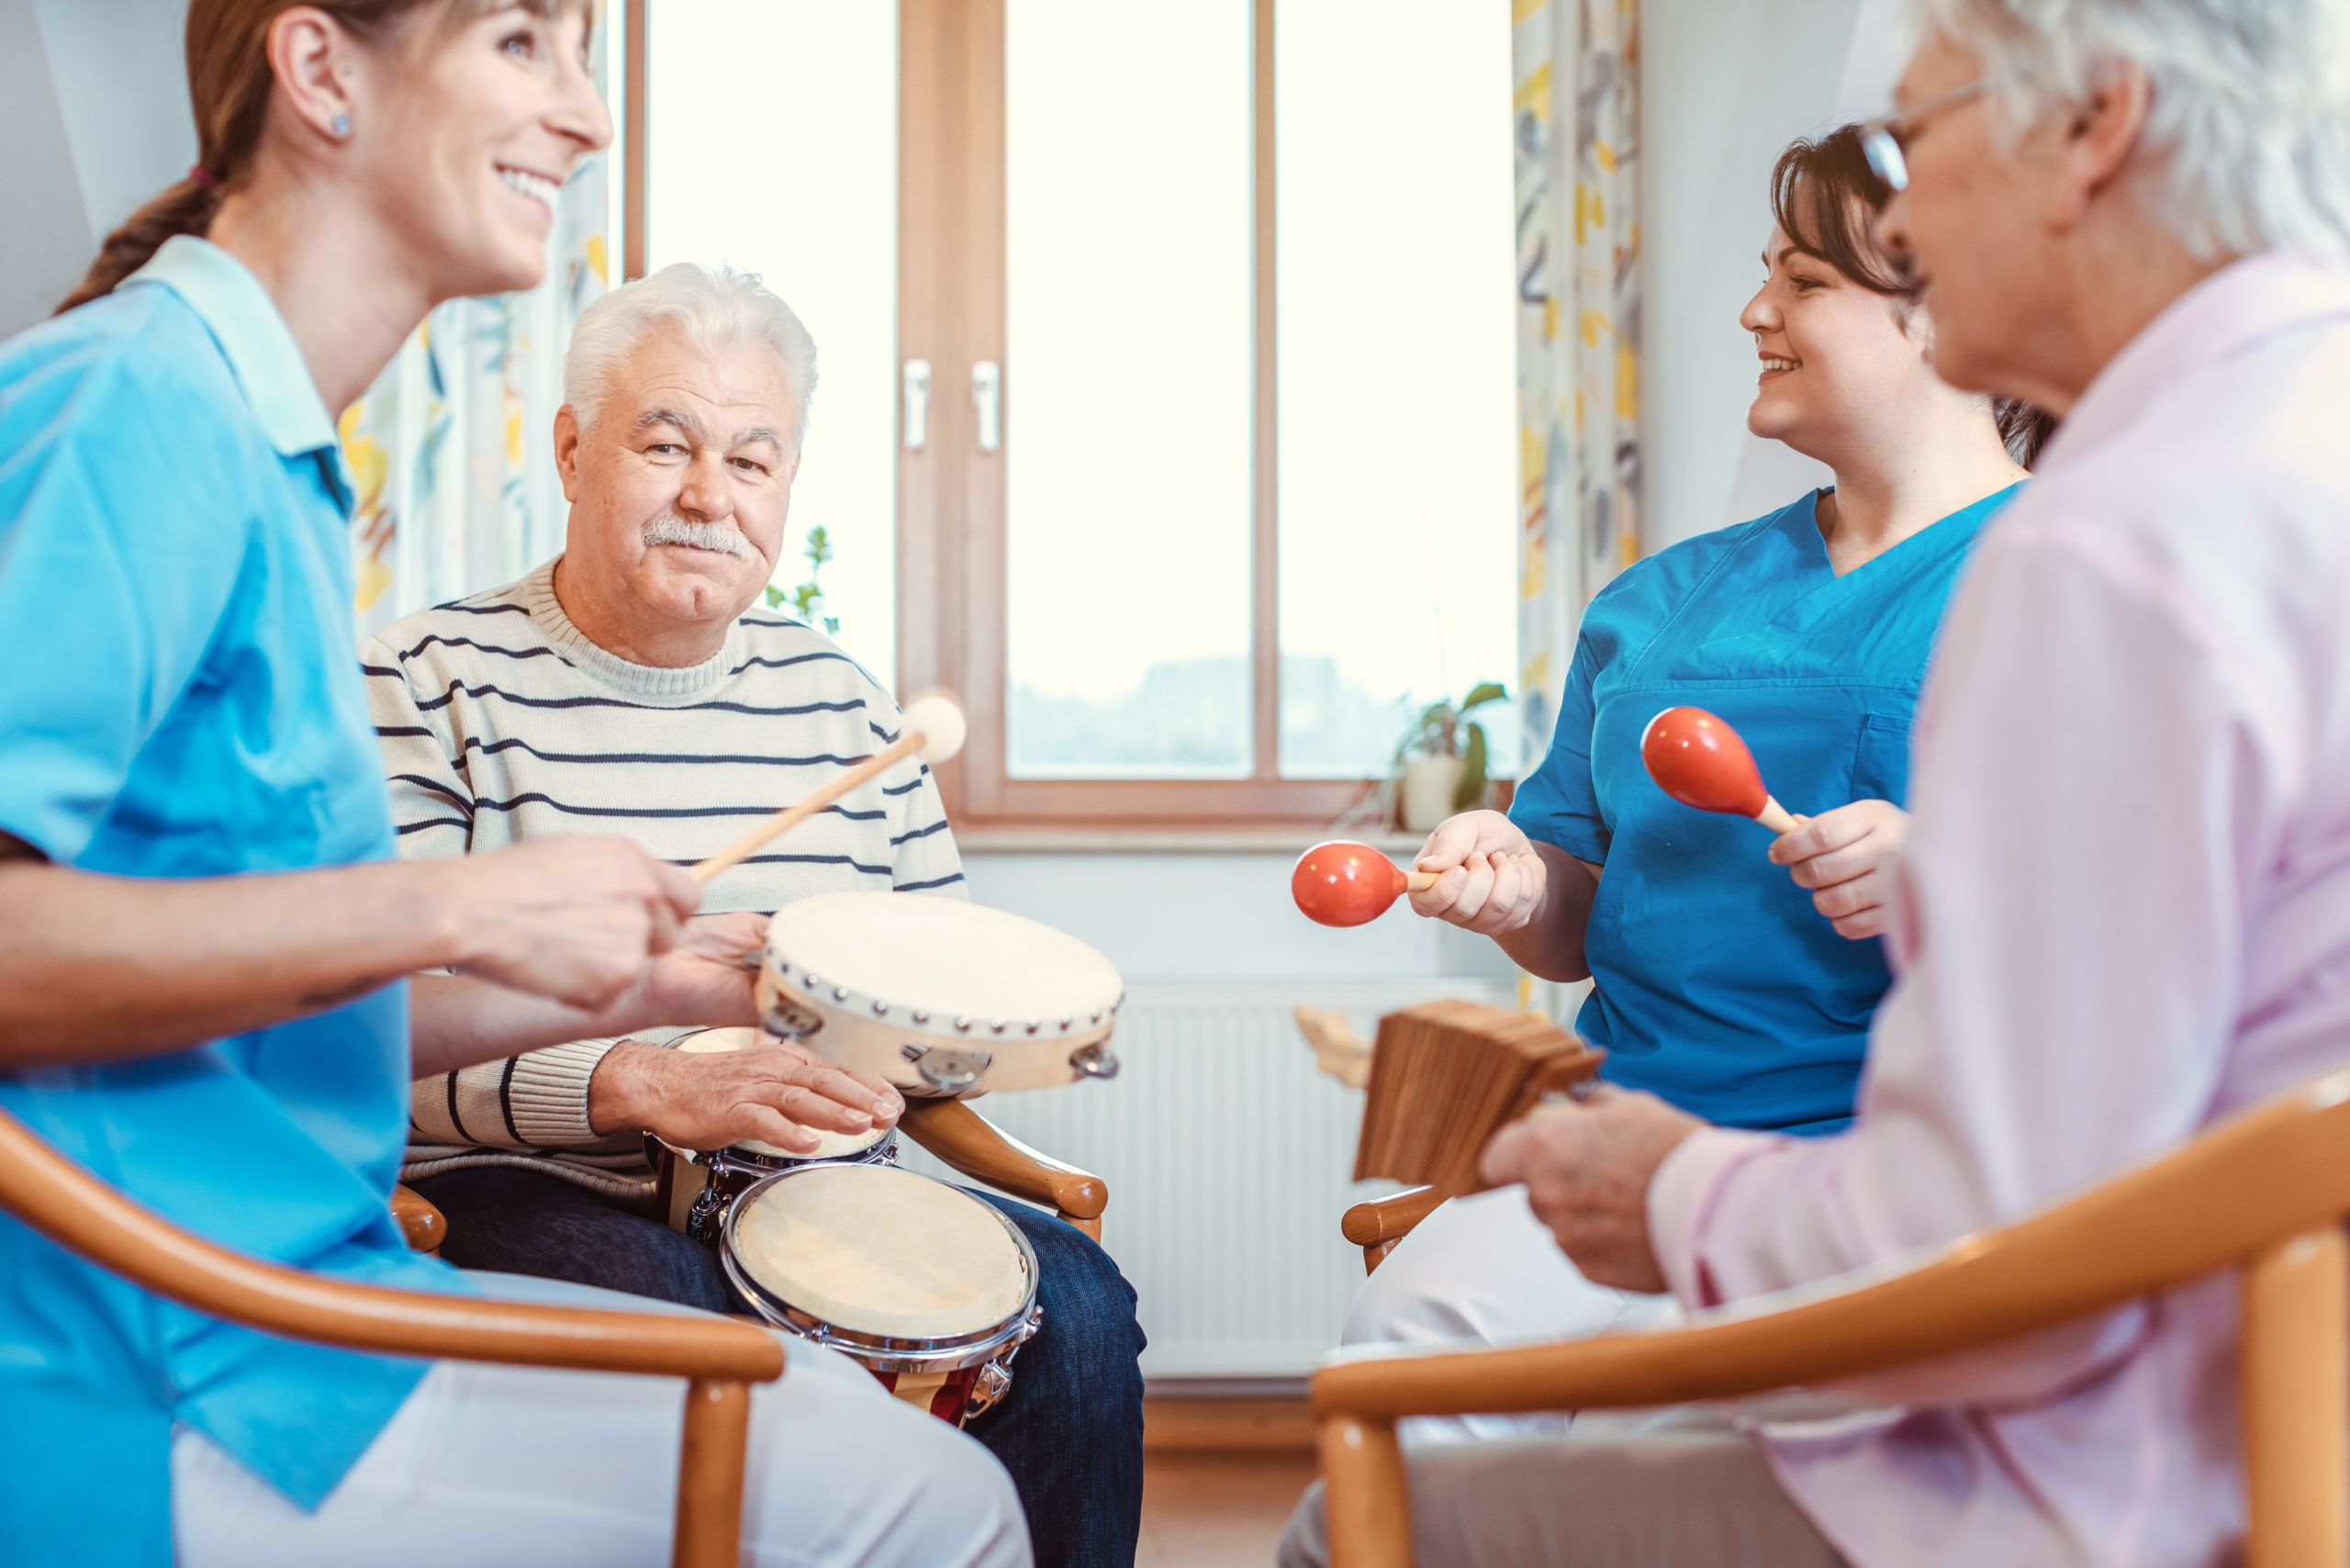 Music Therapy For Dementia Patients In Hospitals